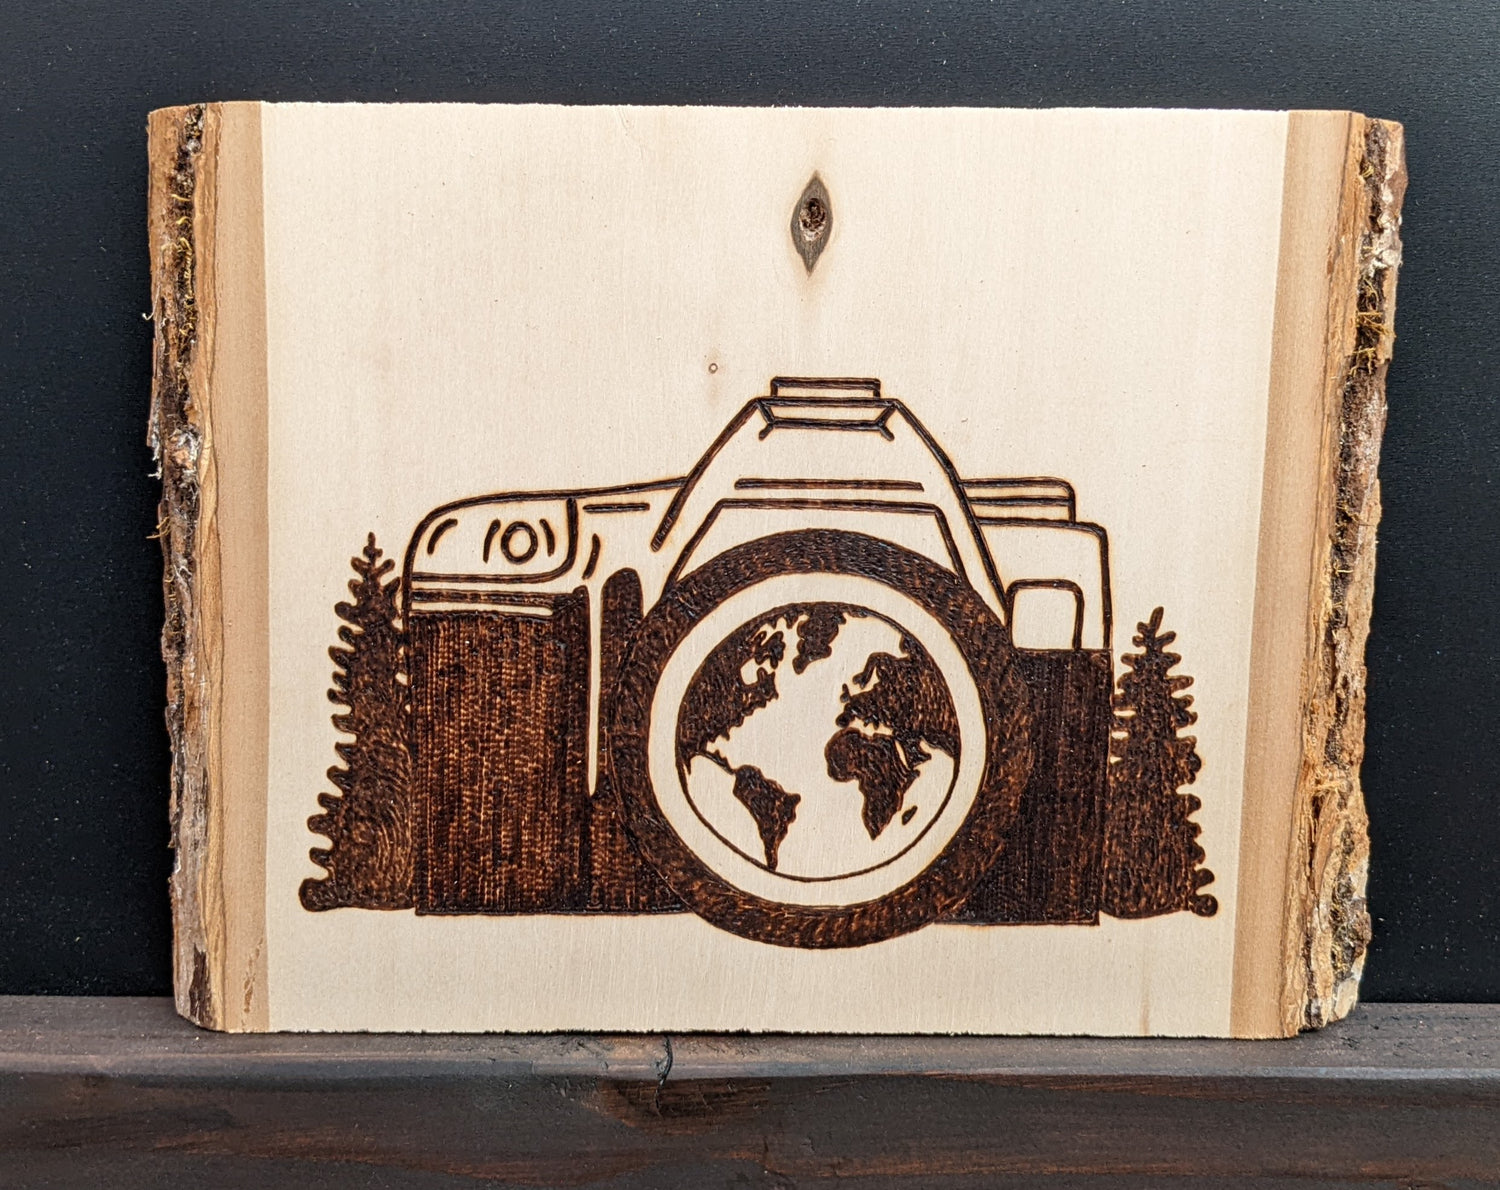 Wood burned Art by Wood Wanderlust - camera with world in view and surrounded by pines